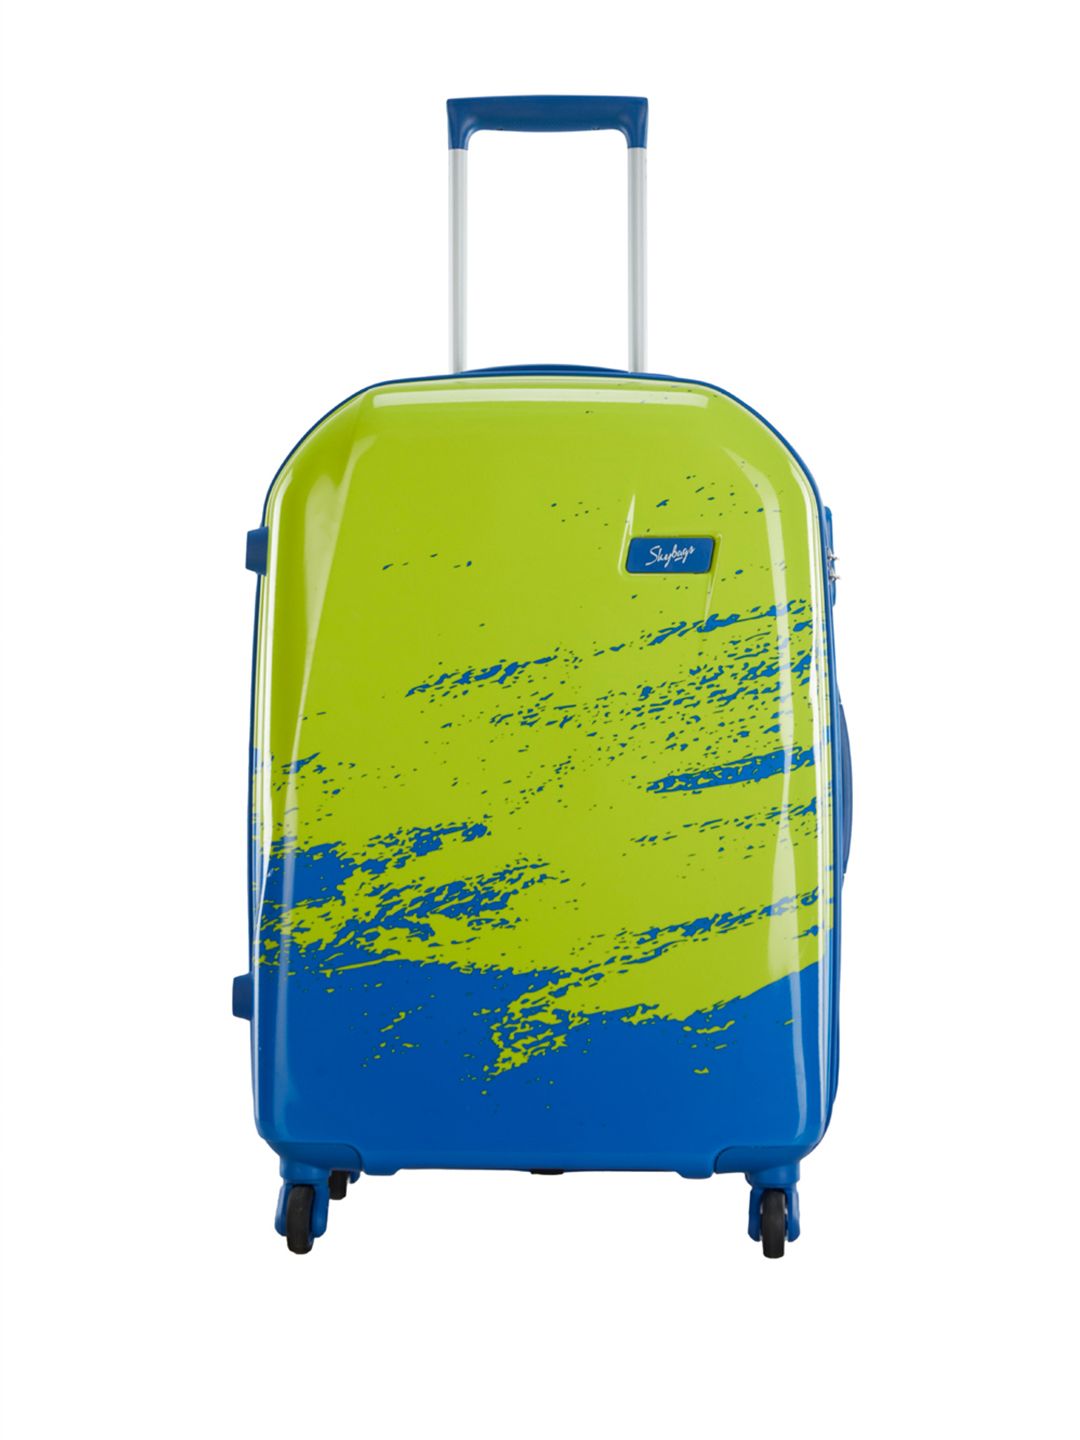 Skybags Yellow & Blue Horizon 67 360 Medium Trolley Suitcase Price in India